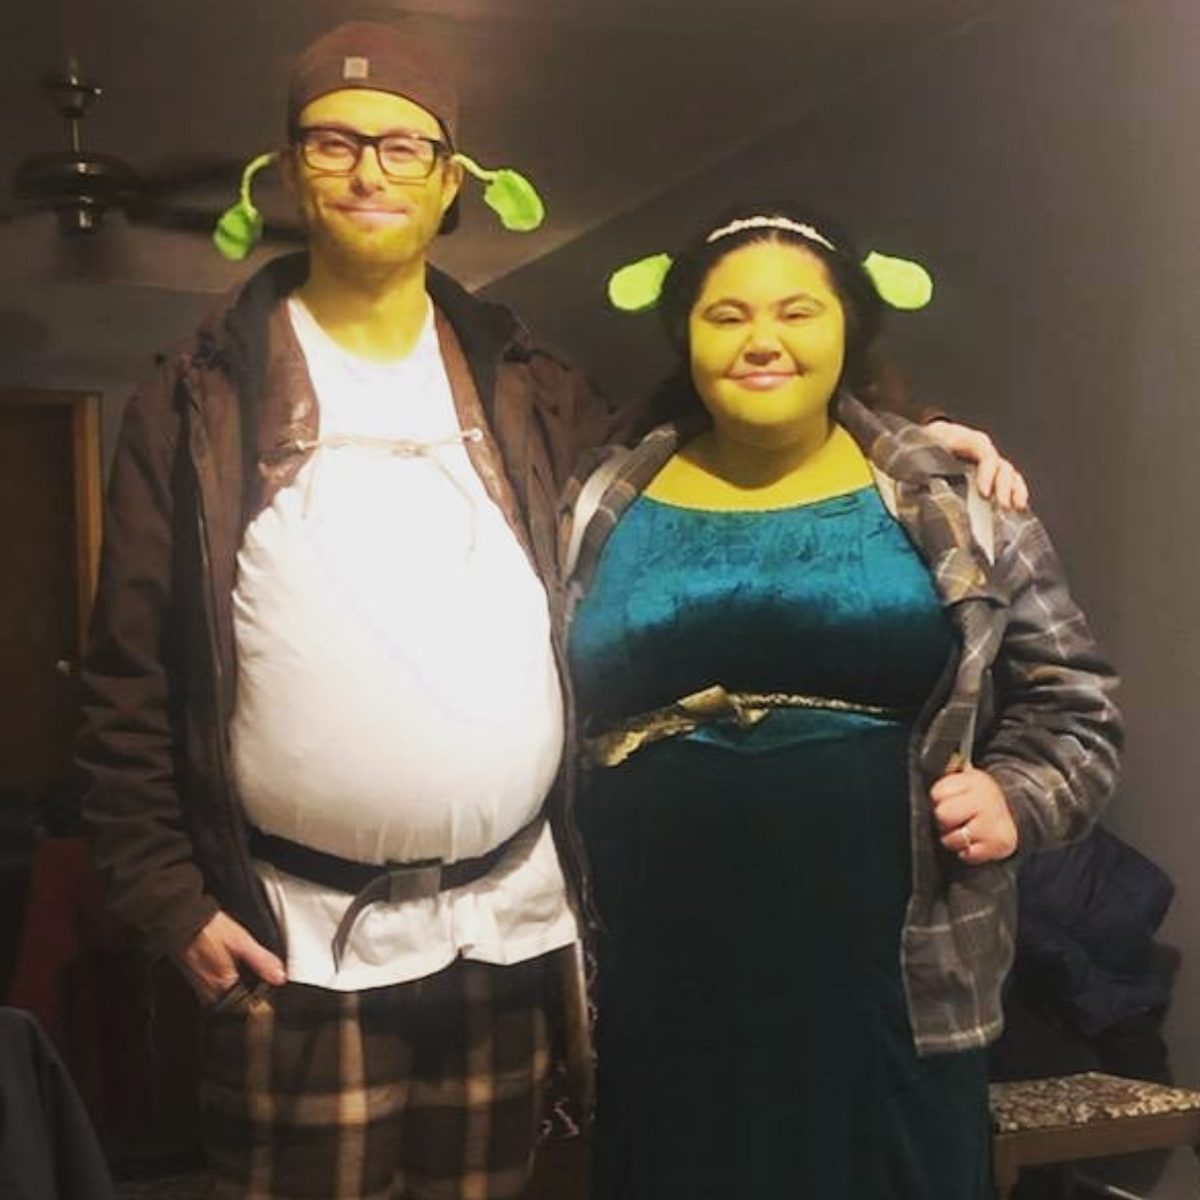 Coolest Homemade Beer Costumes